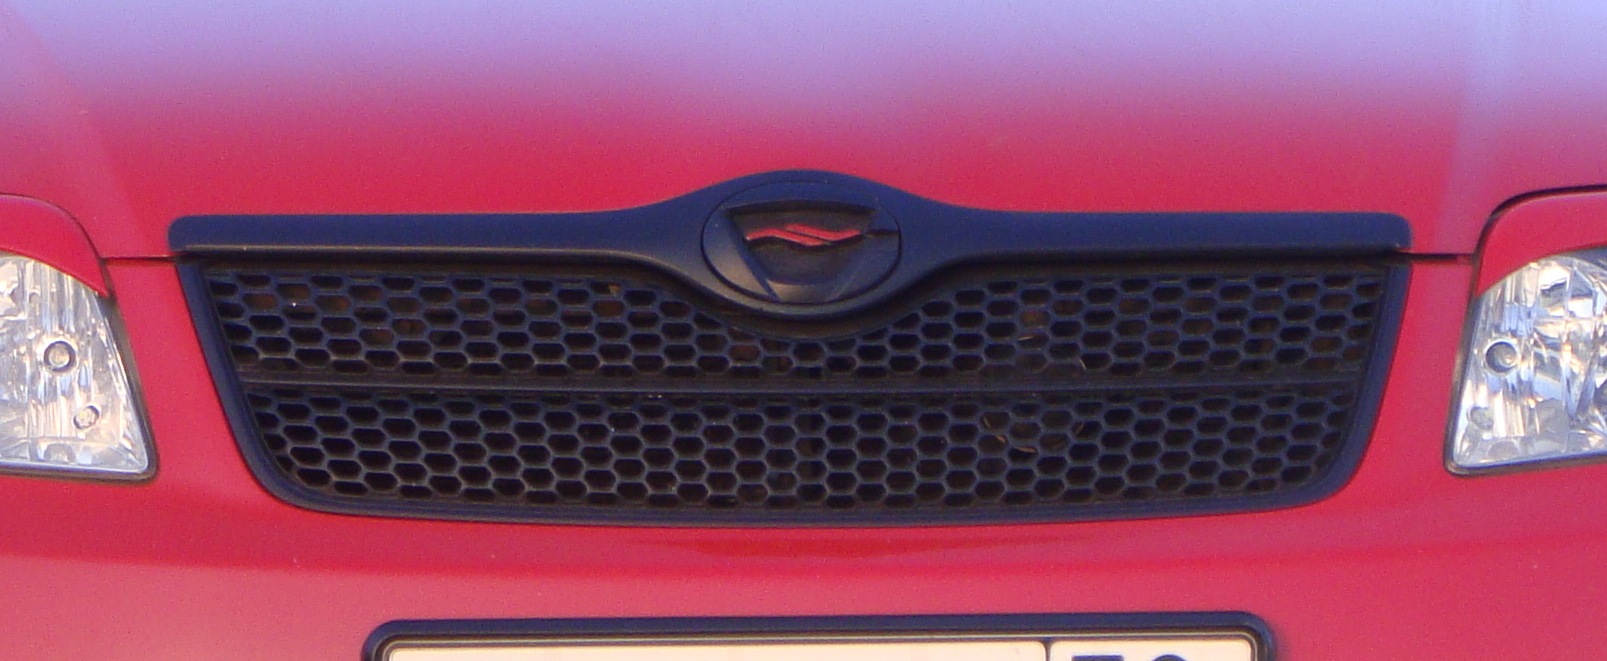 Brushed Grille - Toyota Corolla Fielder 2005